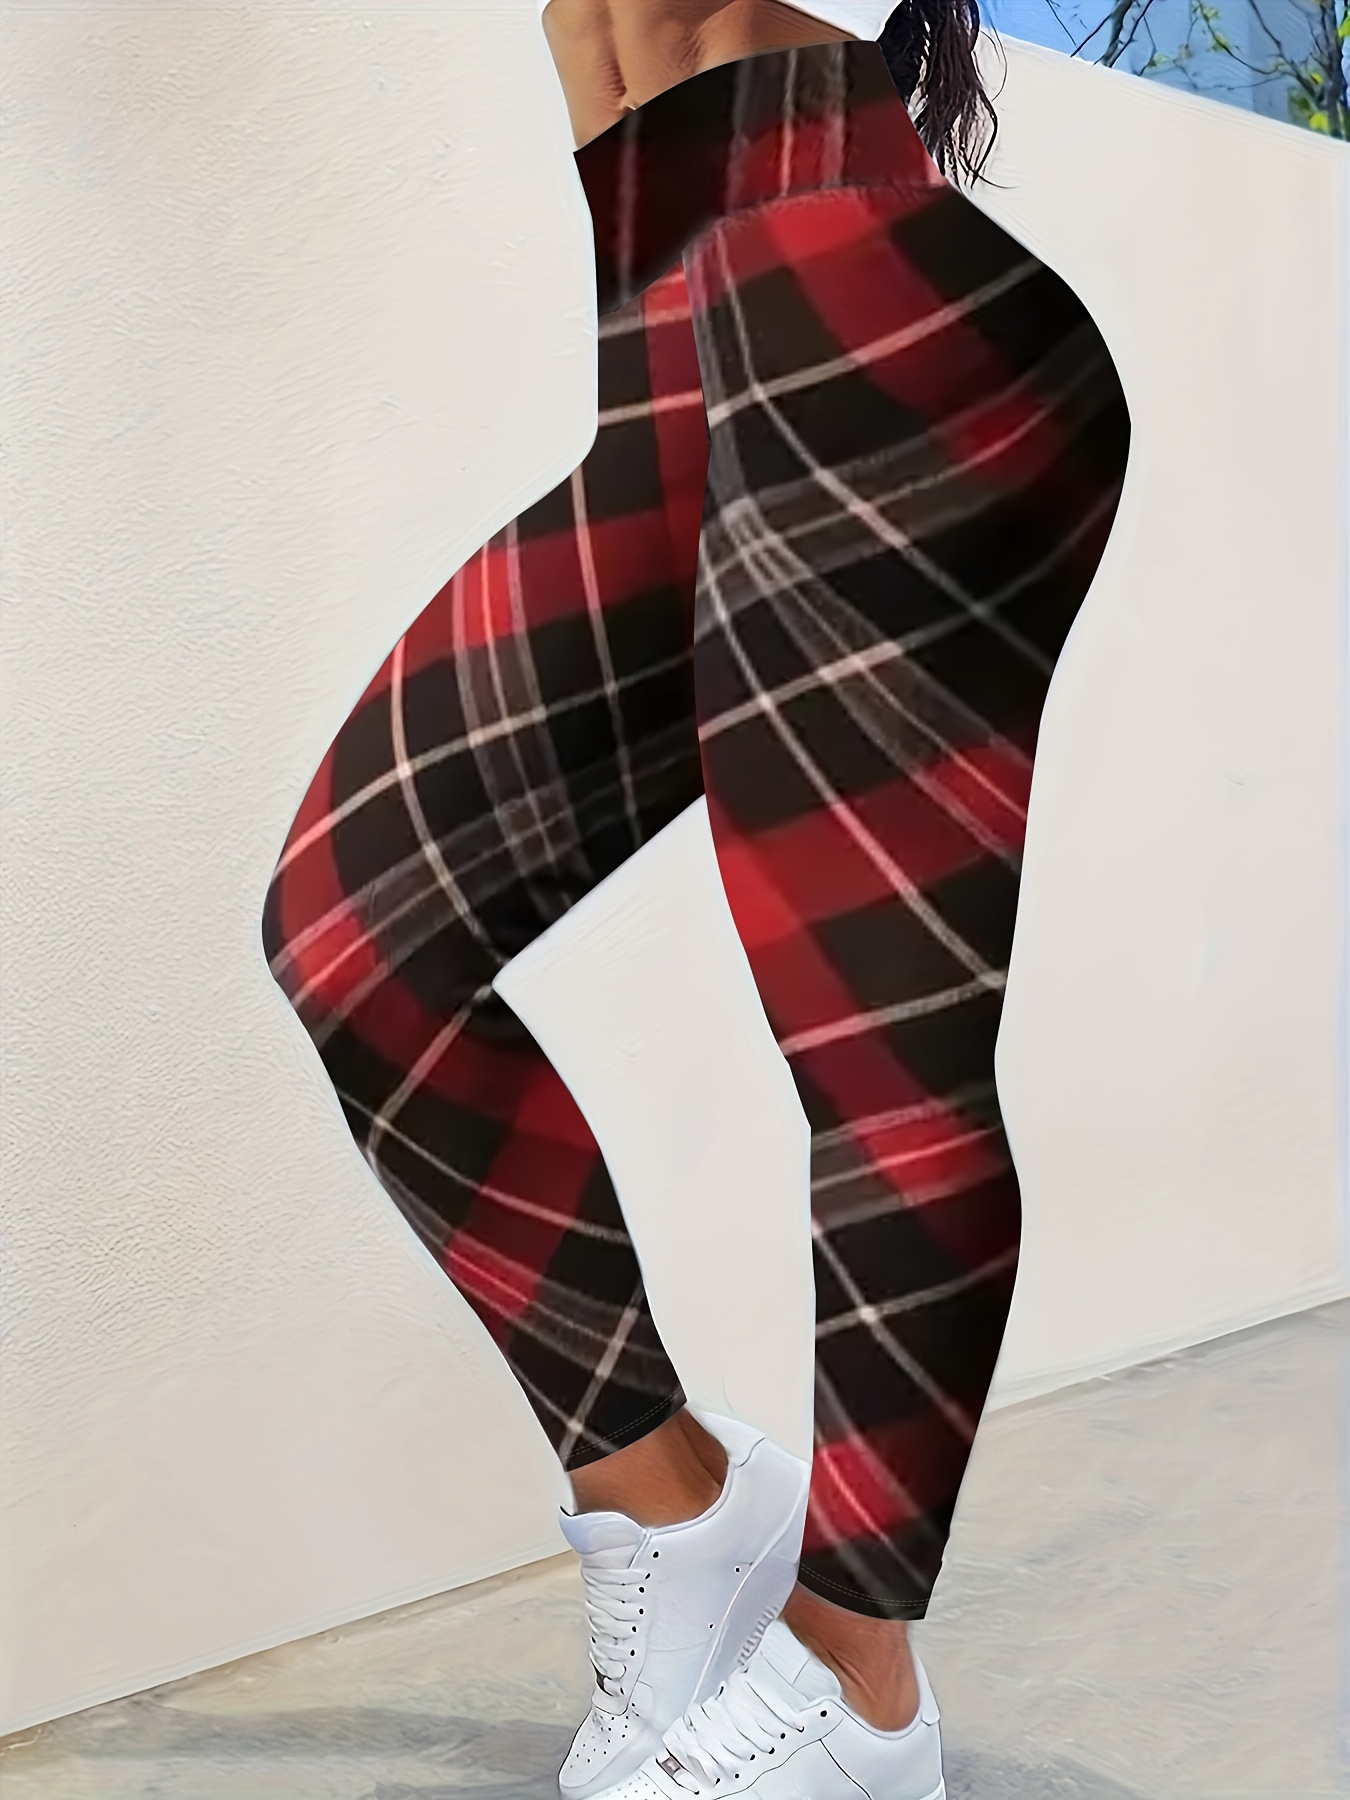 Red Moon Wolf Leggings, Gym, Fitness & Sports Clothing